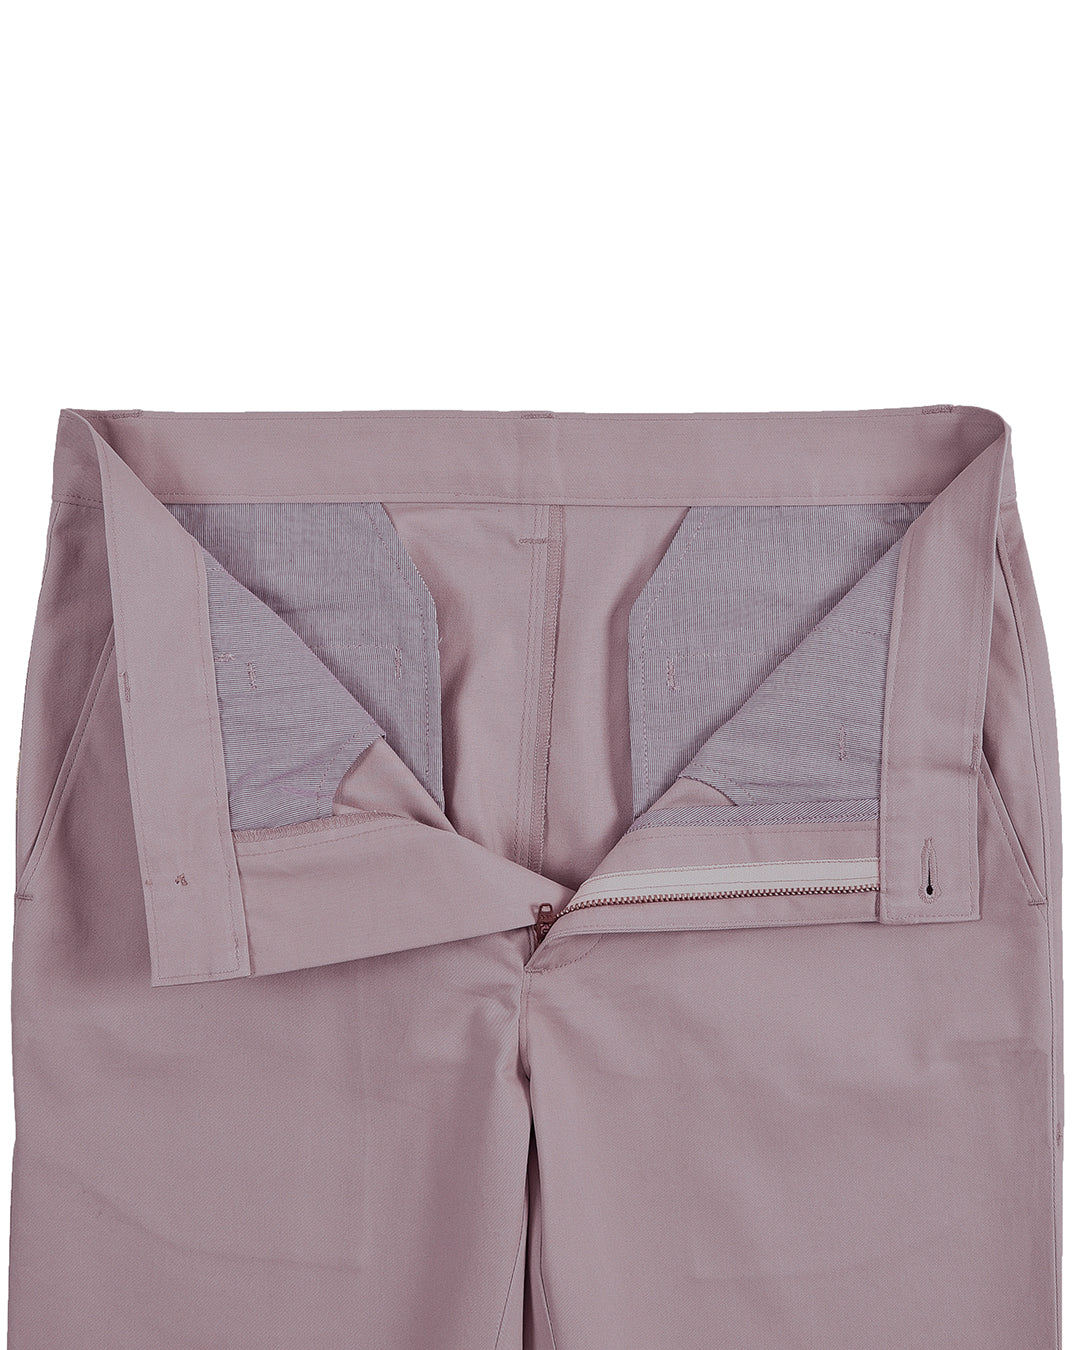 Open front view of custom Genoa Chino pants for men by Luxire in purple fade